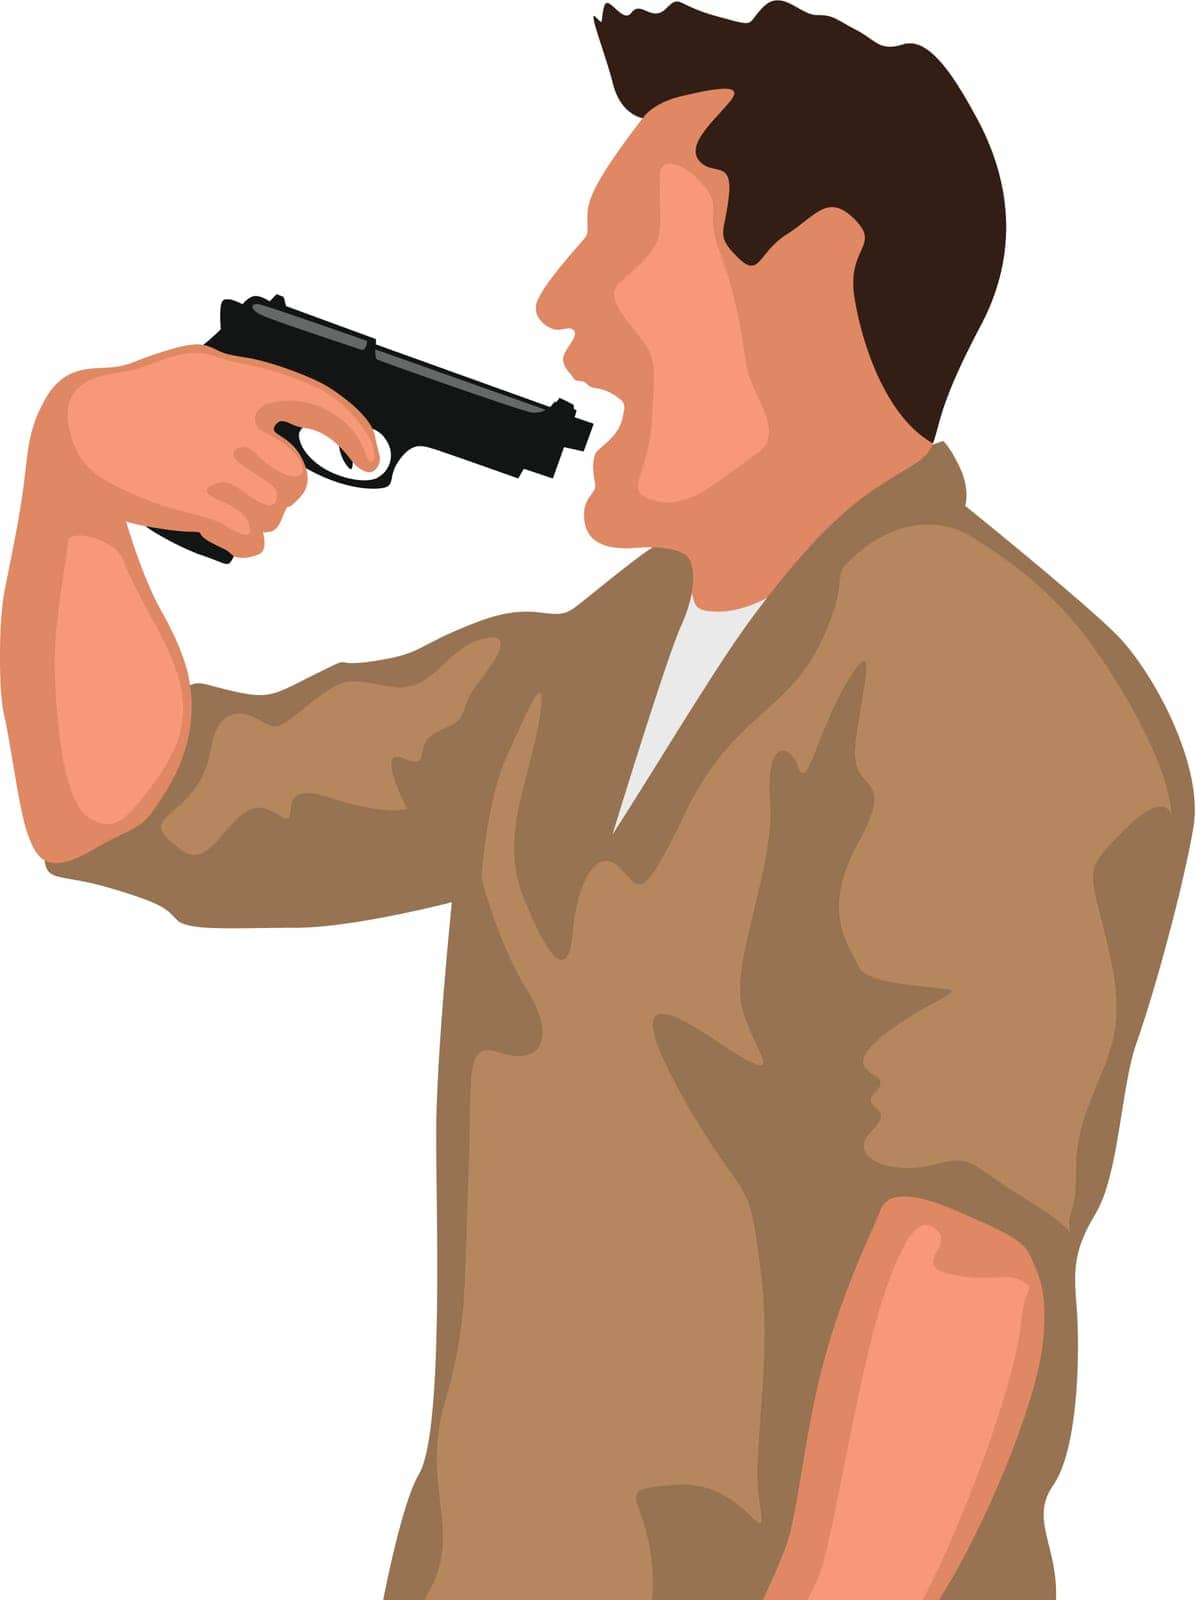 illustration of man with gun suicide on white background